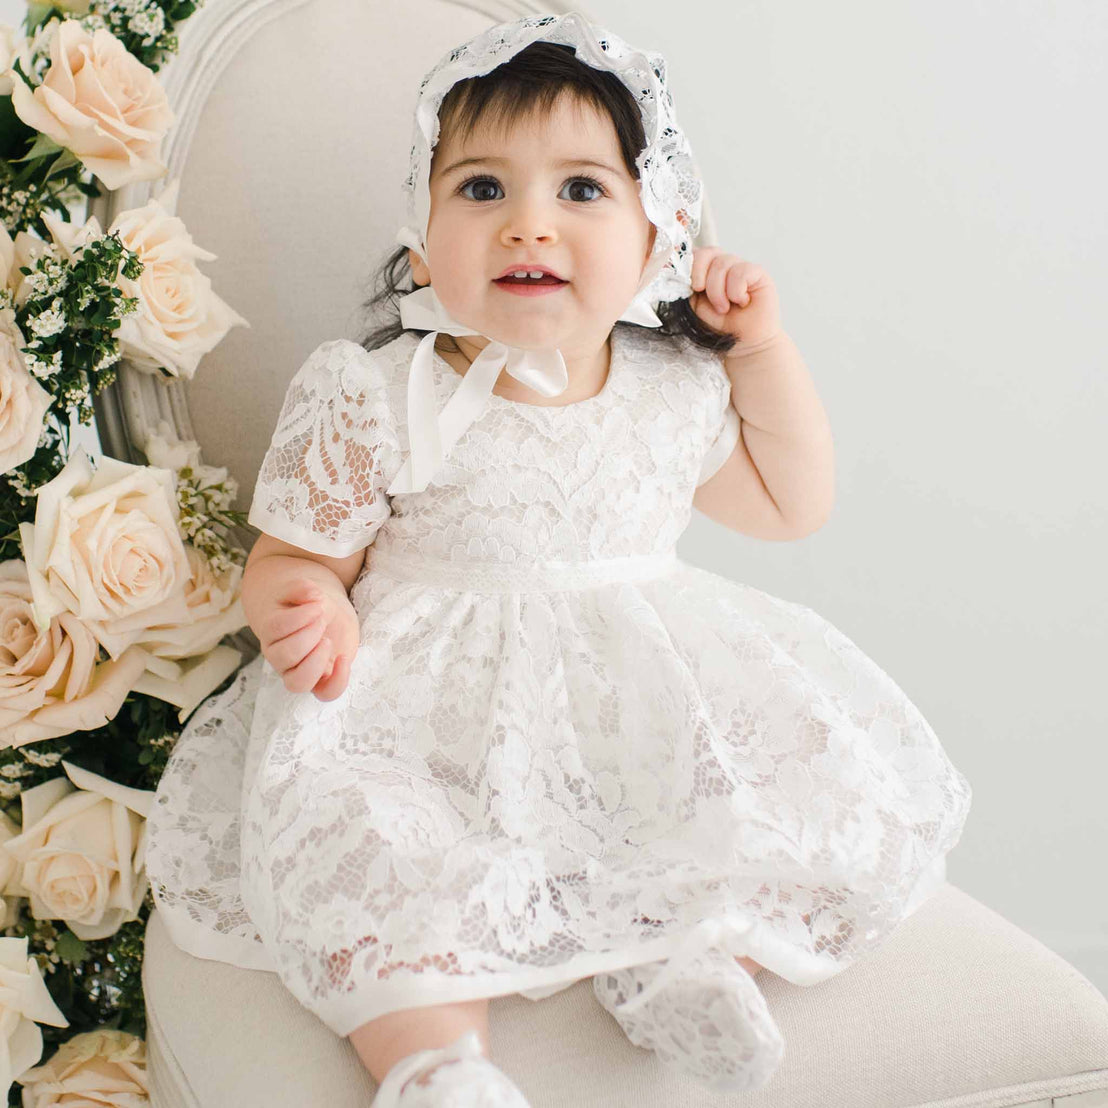 A baby girl in a white Rose Romper Dress and matching bonnet sits on a cream chair surrounded by pale pink roses, looking up with a joyful expression.